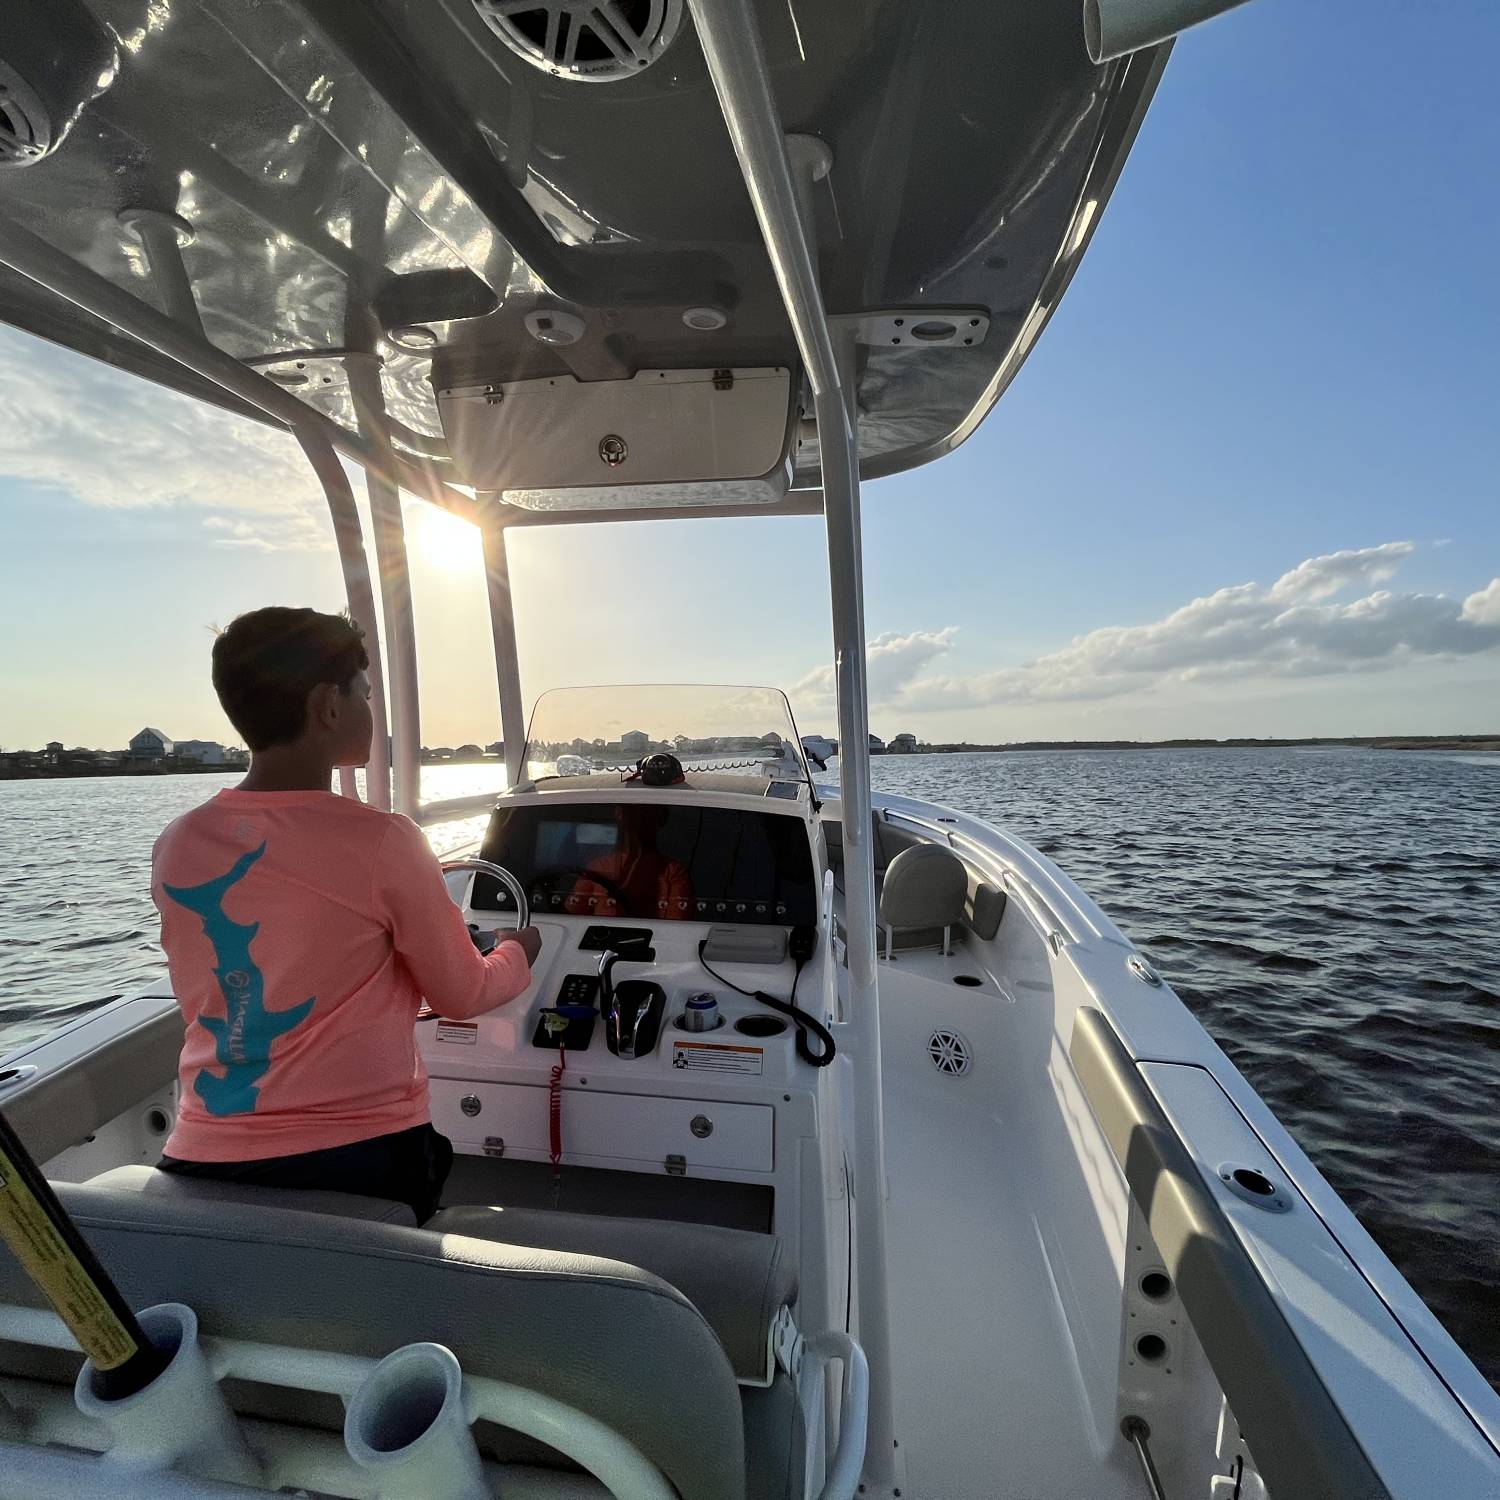 Title: Teaching him young - On board their Sportsman Open 232 Center Console - Location: Bay St Louis, MS. Participating in the Photo Contest #SportsmanApril2023